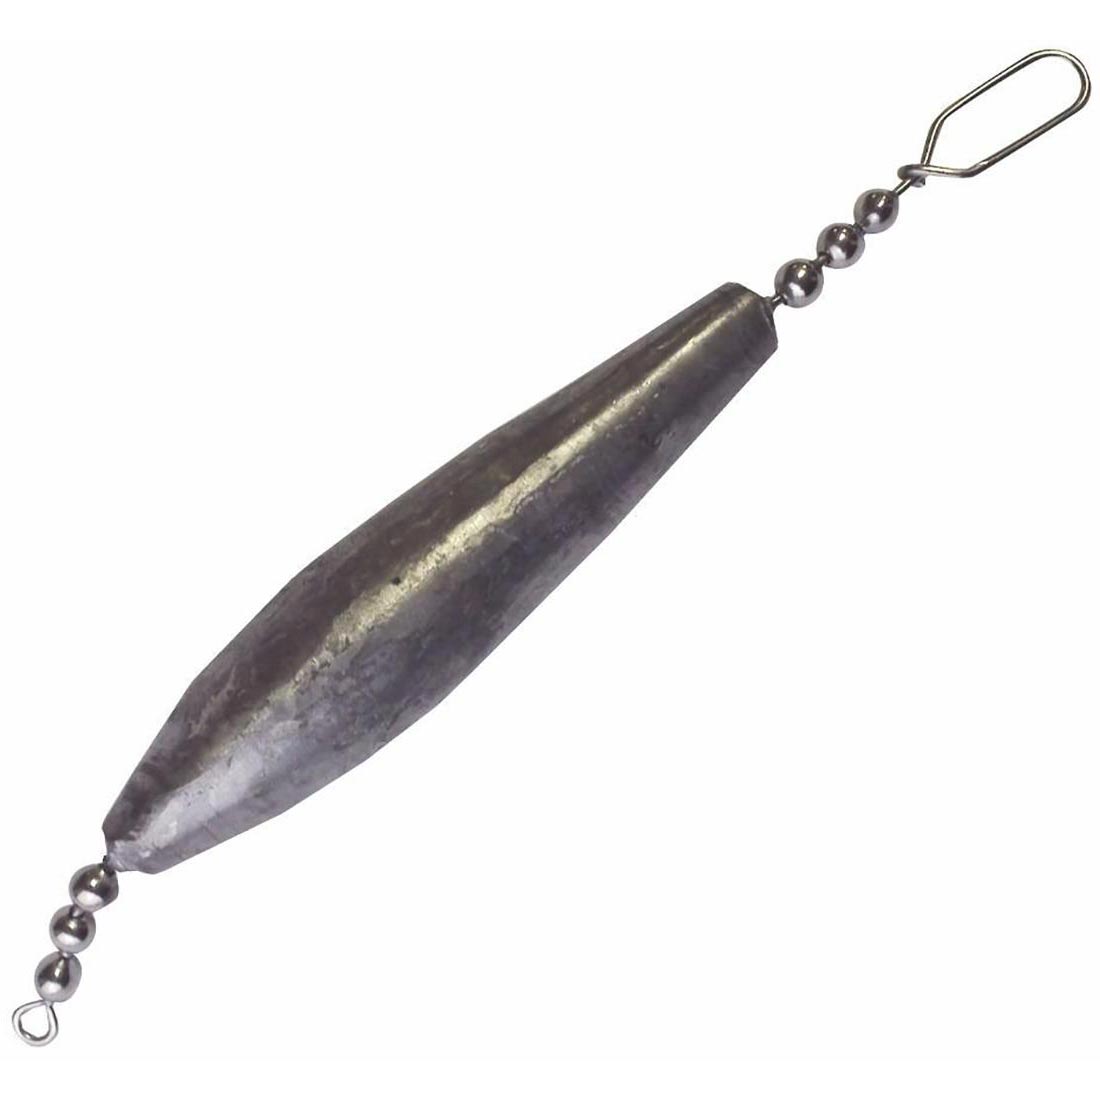 Snap Weight, Bead Chain Sinker, Dispsy Diver? Fishing Weights